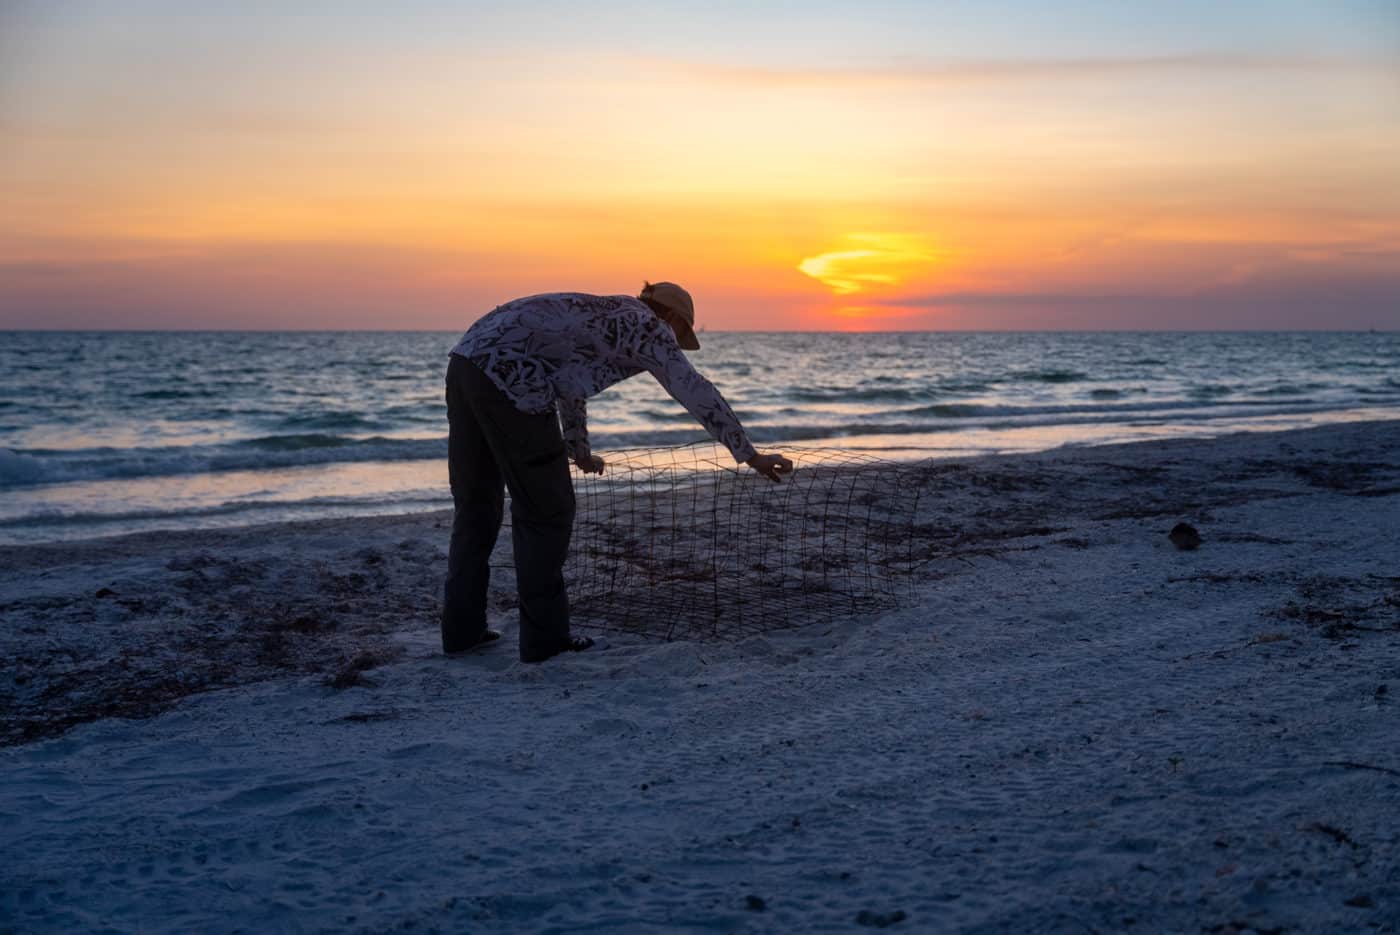 Dr. Jeff Schmid setting a cage to protect a sea turtle nest